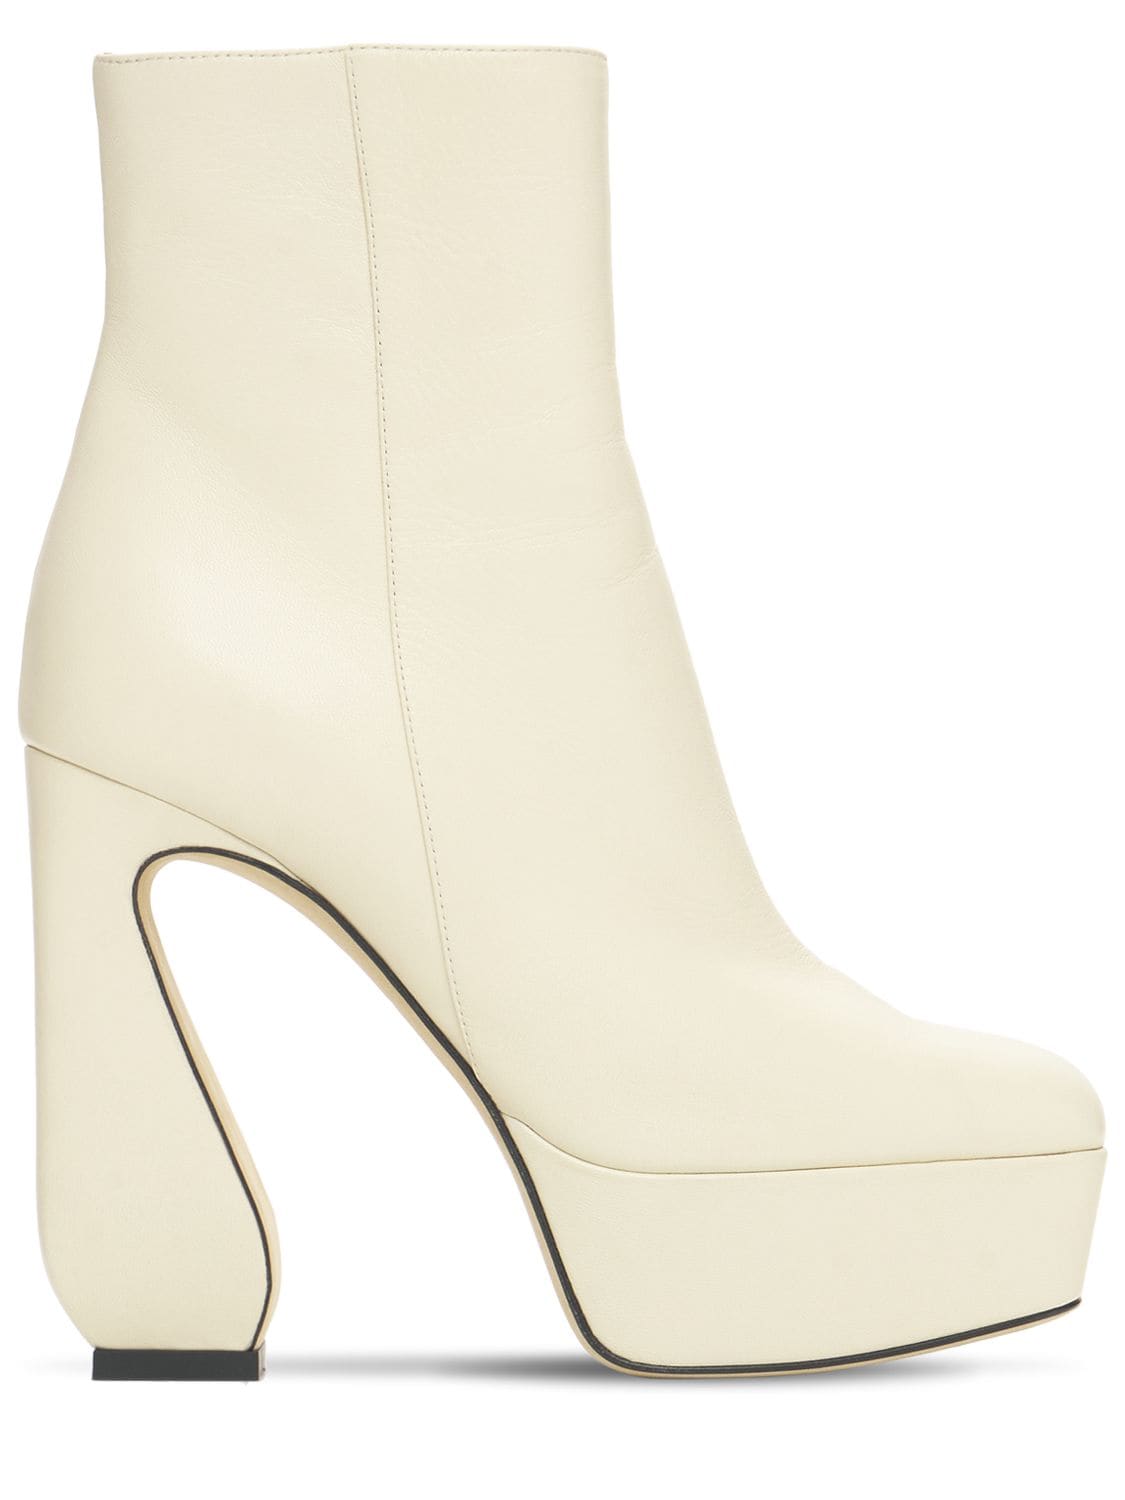 Mm Platform Leather Ankle Boots - SI ROSSI - Modalova